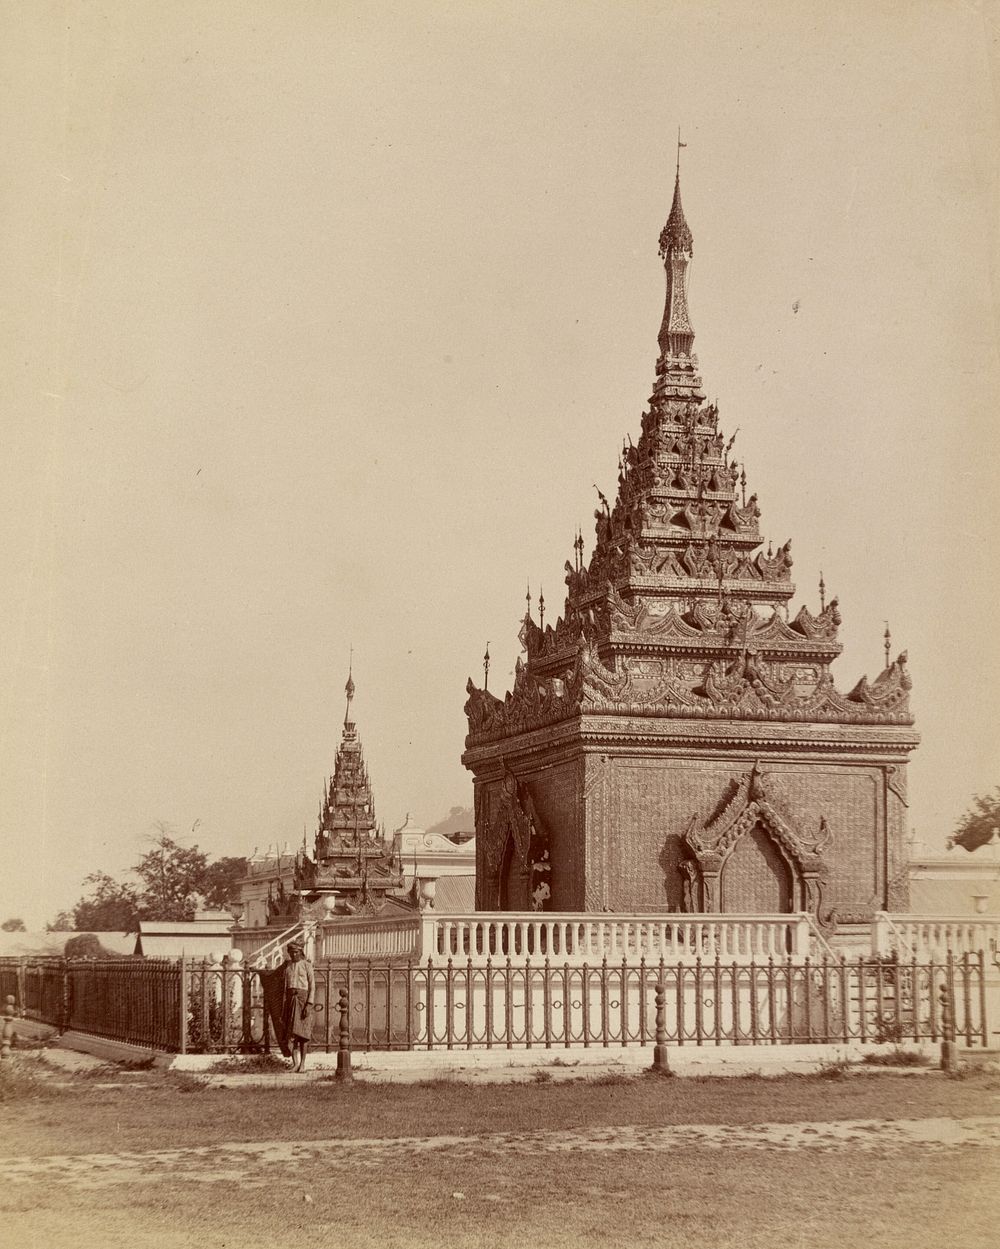 Grave of the King Min-Doon-Min, Father of King Theebaw by Felice Beato